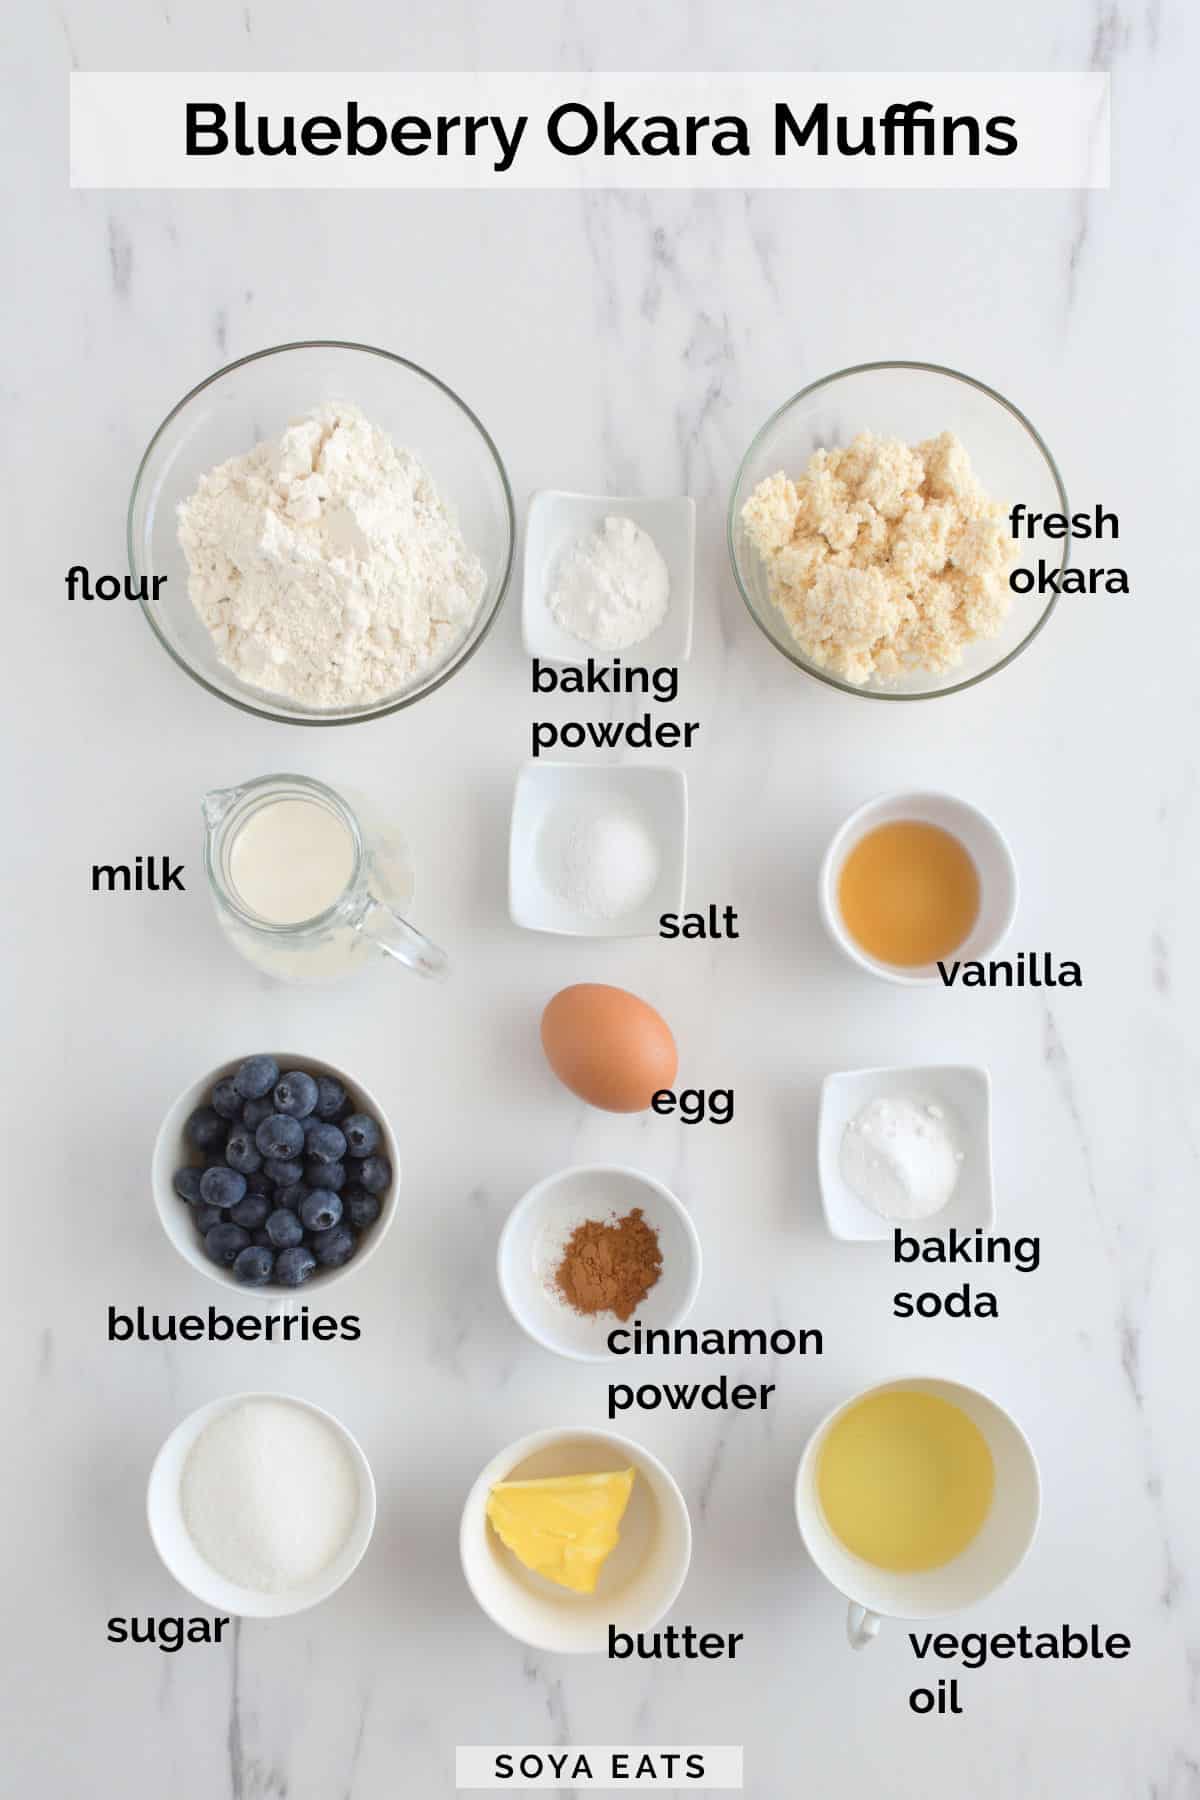 Image showing the ingredients needed for okara muffins.